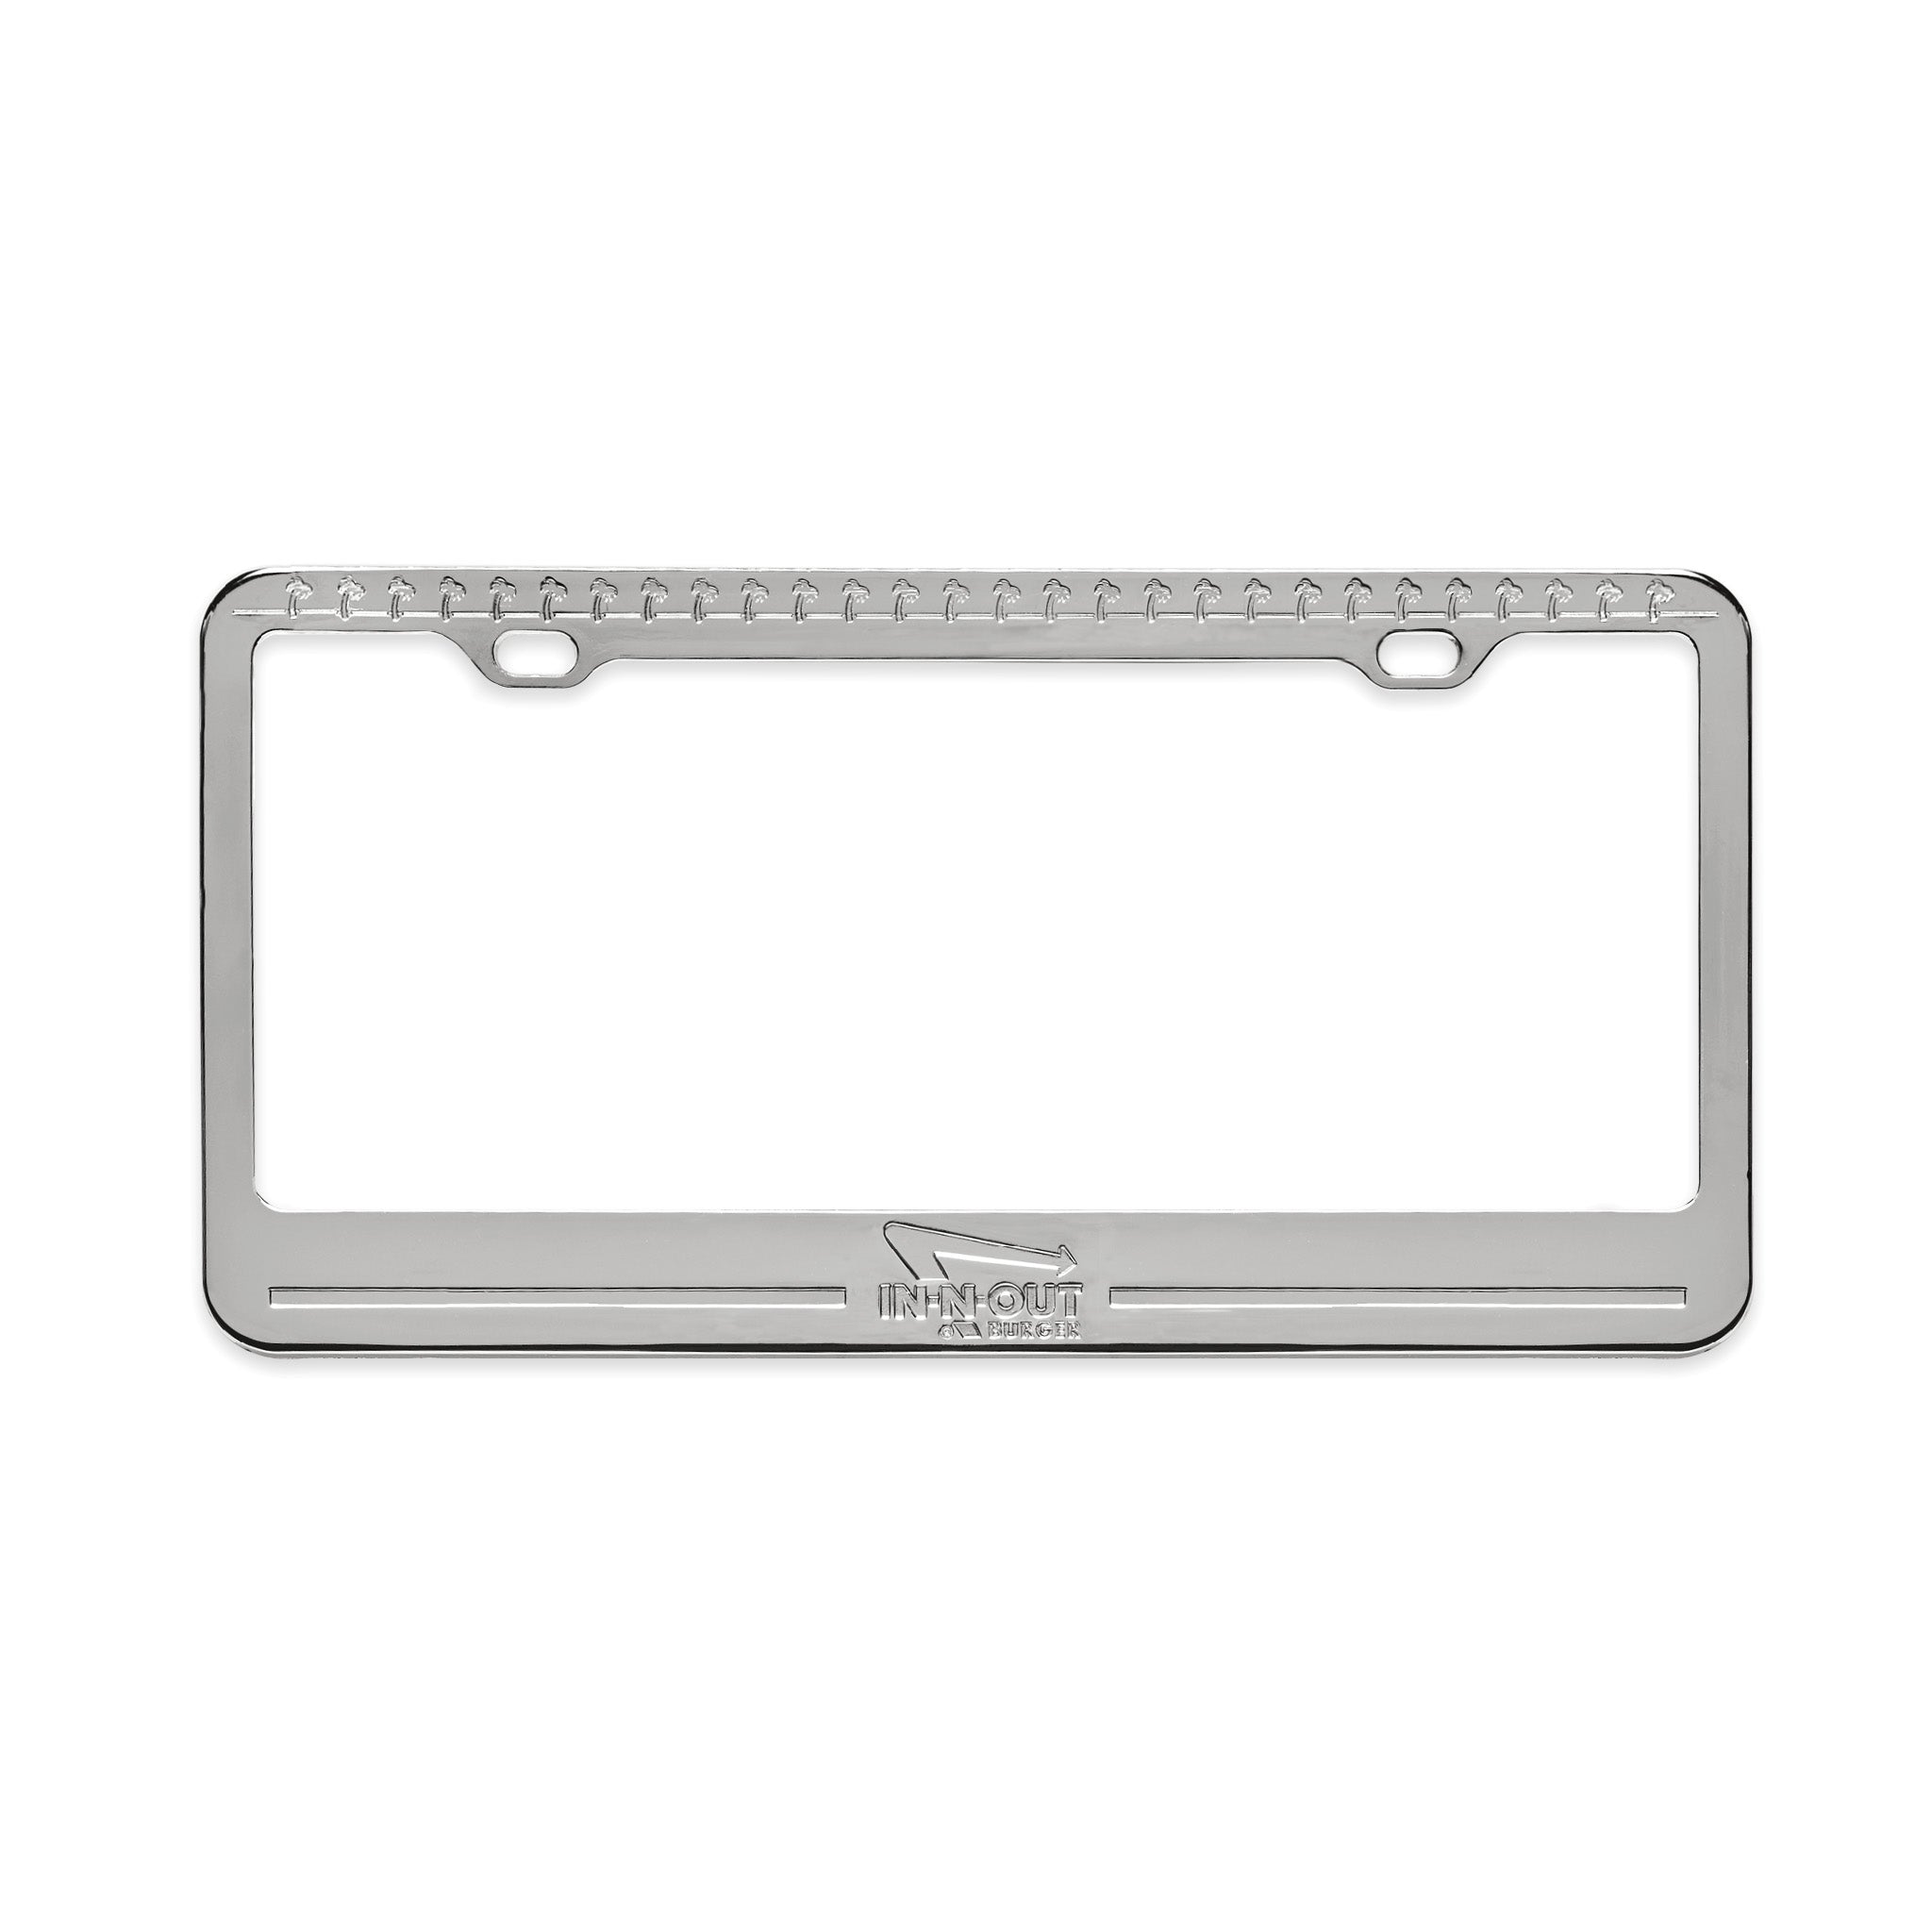 Drink Cup License Plate Frame – In-N-Out Burger Company Store